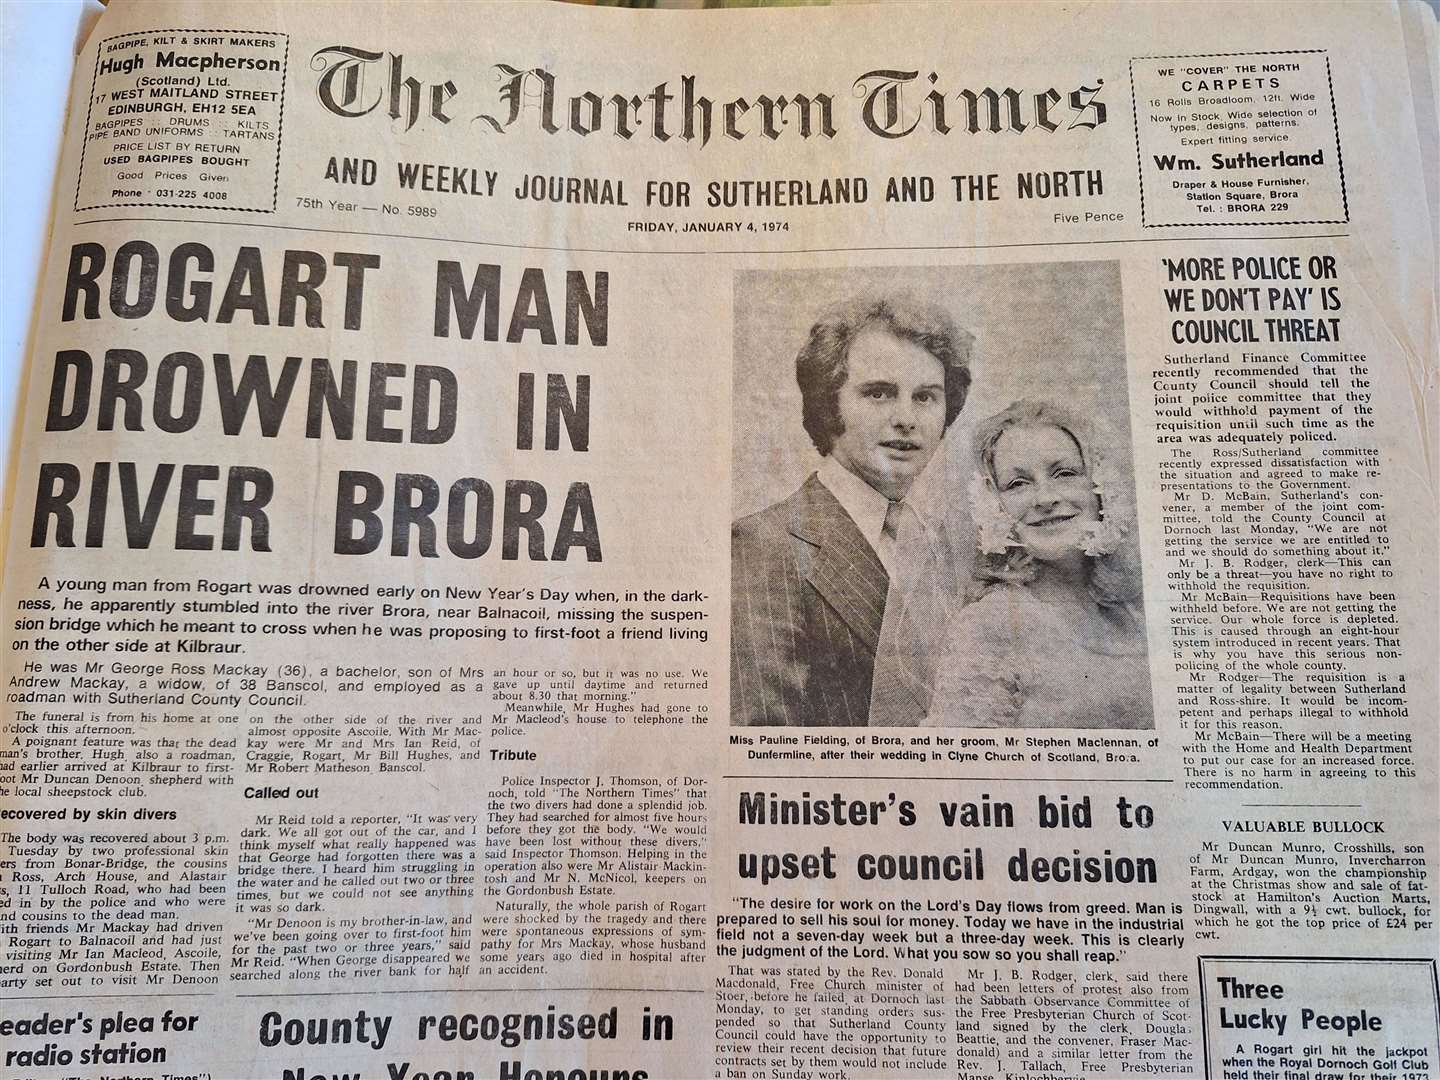 The newspaper of January 4, 1974.